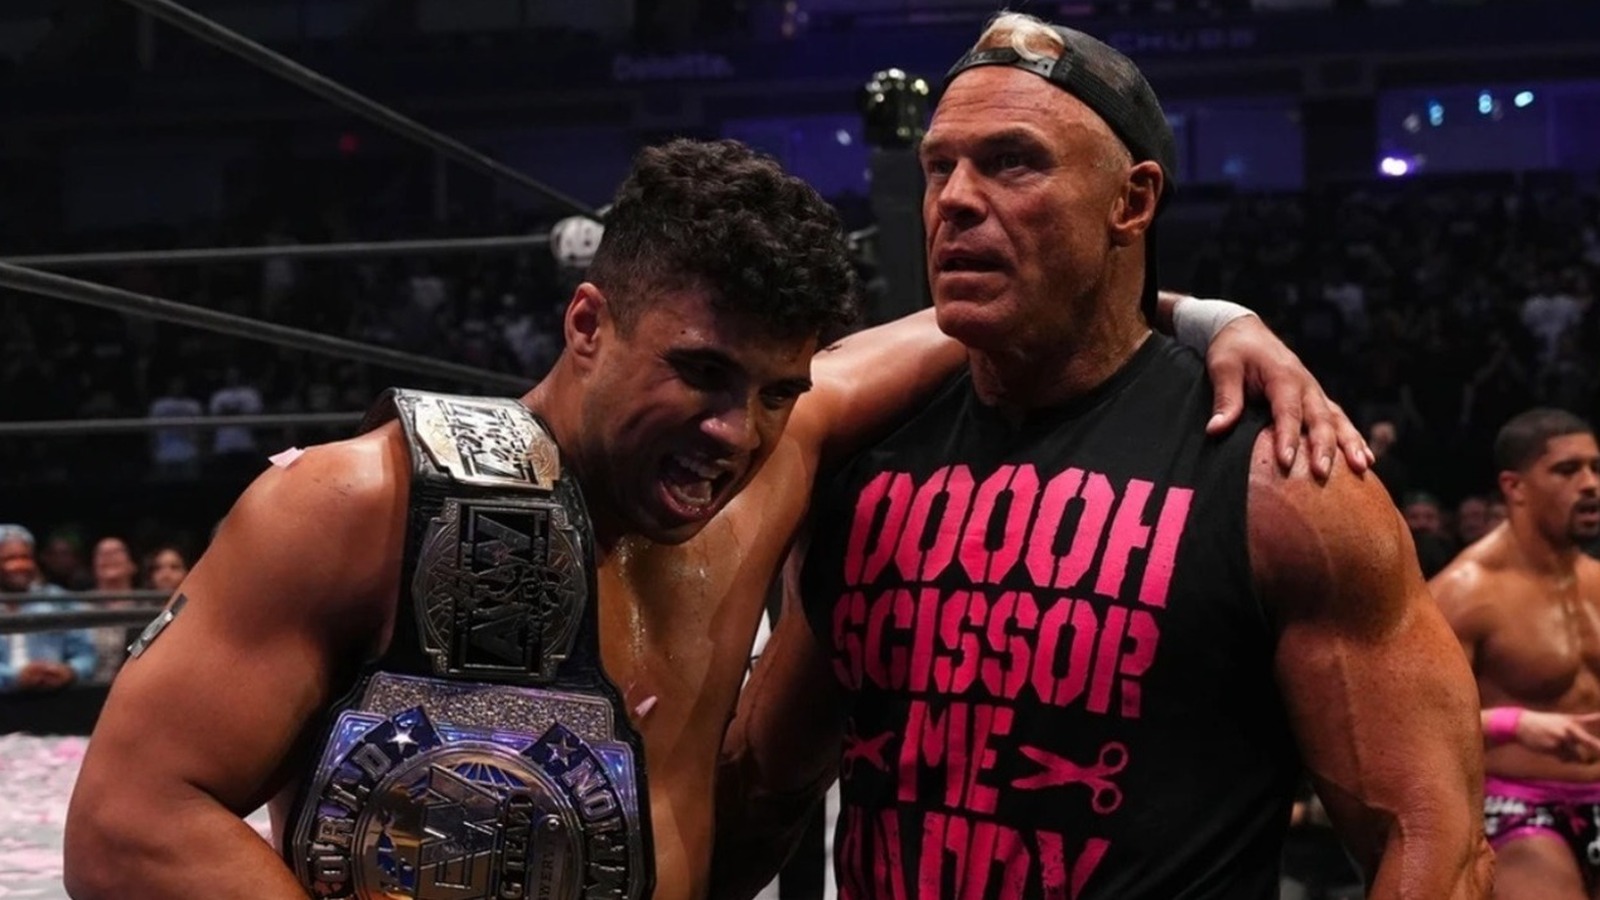 Max Caster Details Trying To Get Billy Gunn's Former Tag Team Partner To Appear In AEW